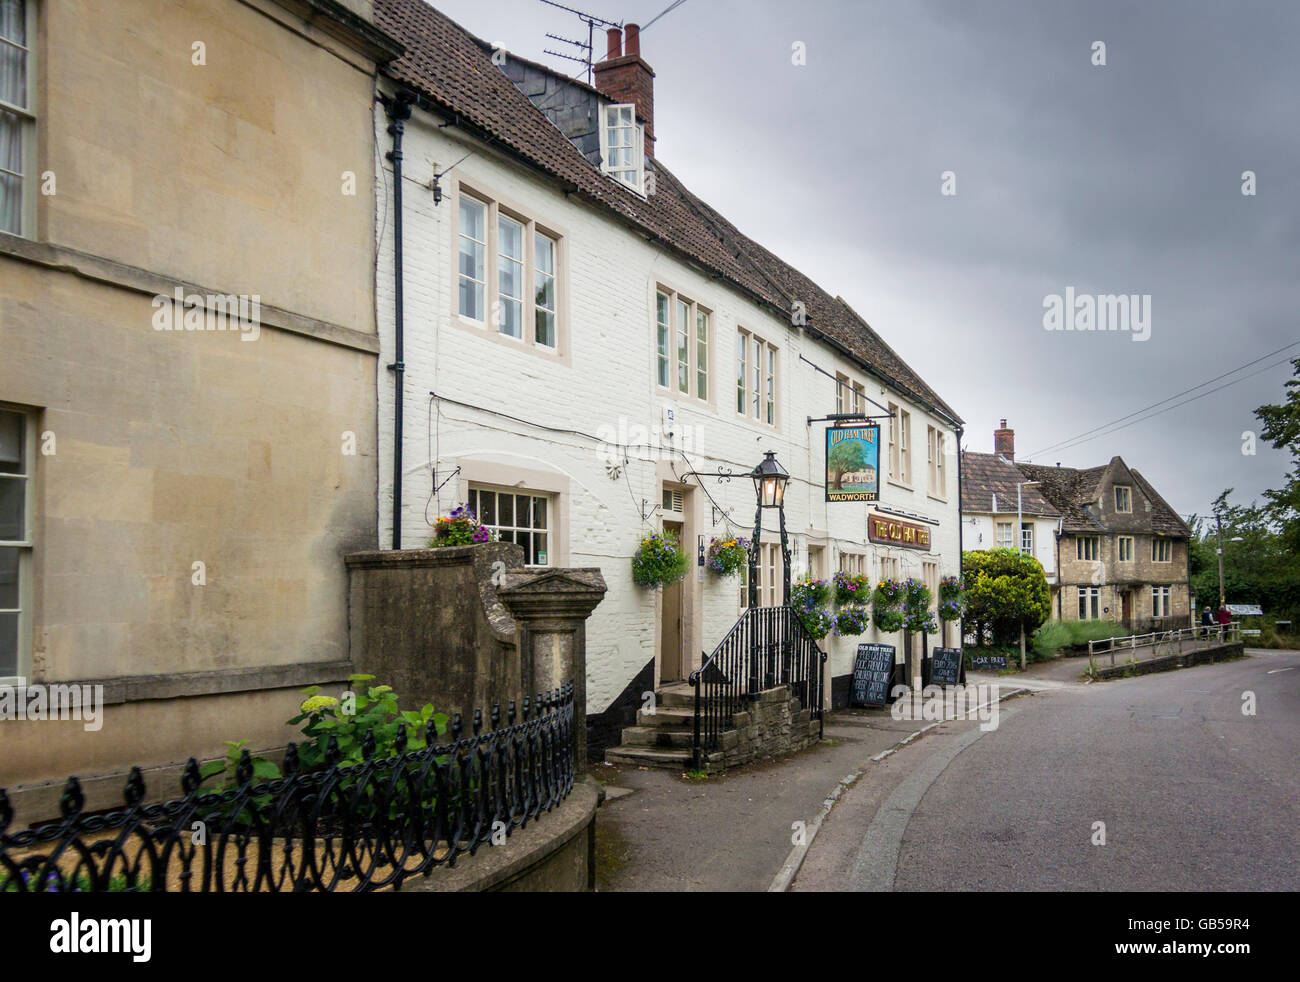 The Old Ham Tree public house in the village of Holt, Wiltshire, UK Stock Photo